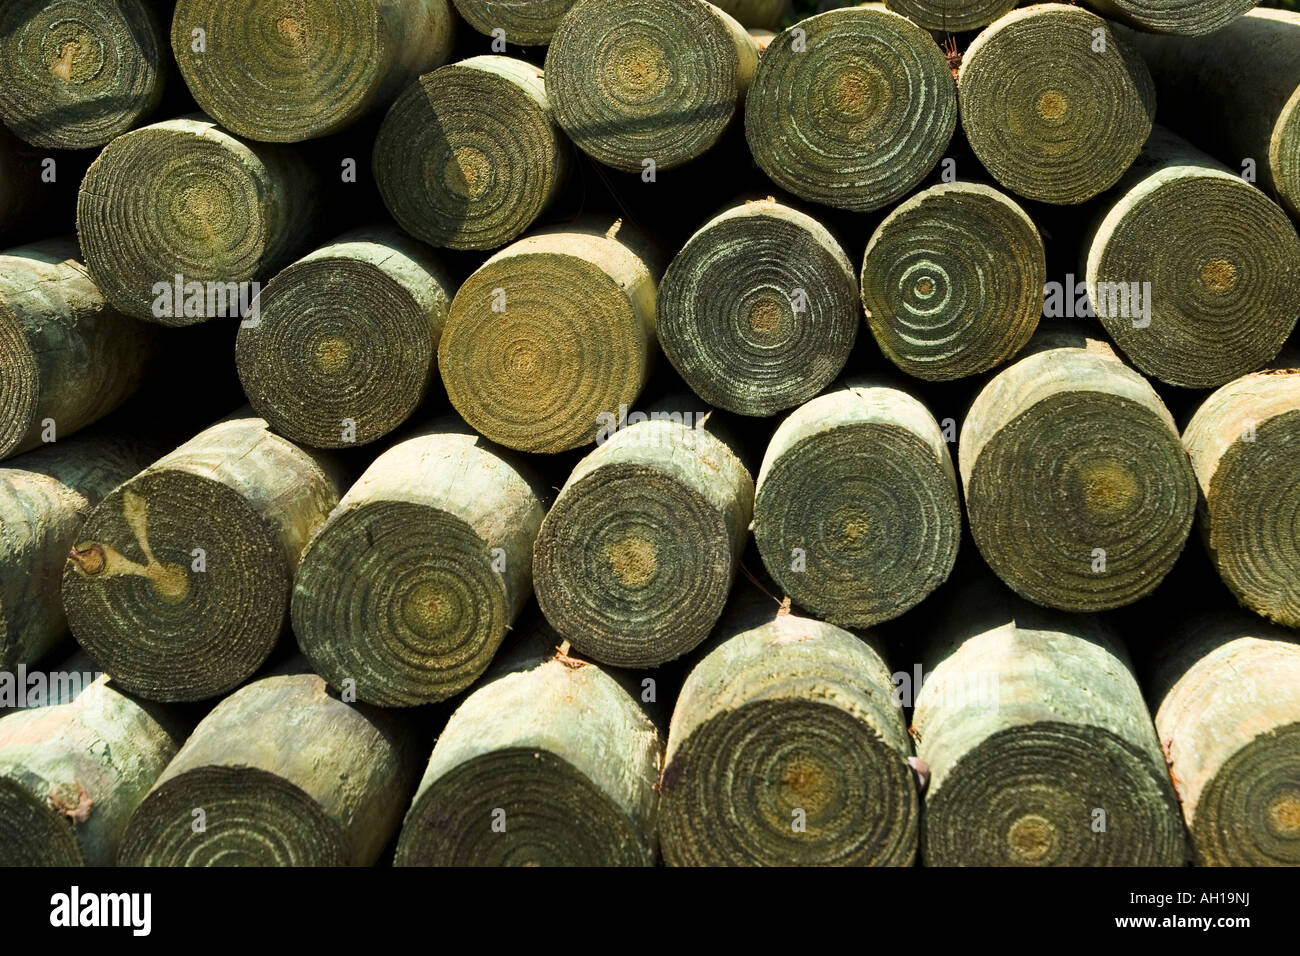 Pressure treated logs waiting to become a fence or other landscape object Stock Photo